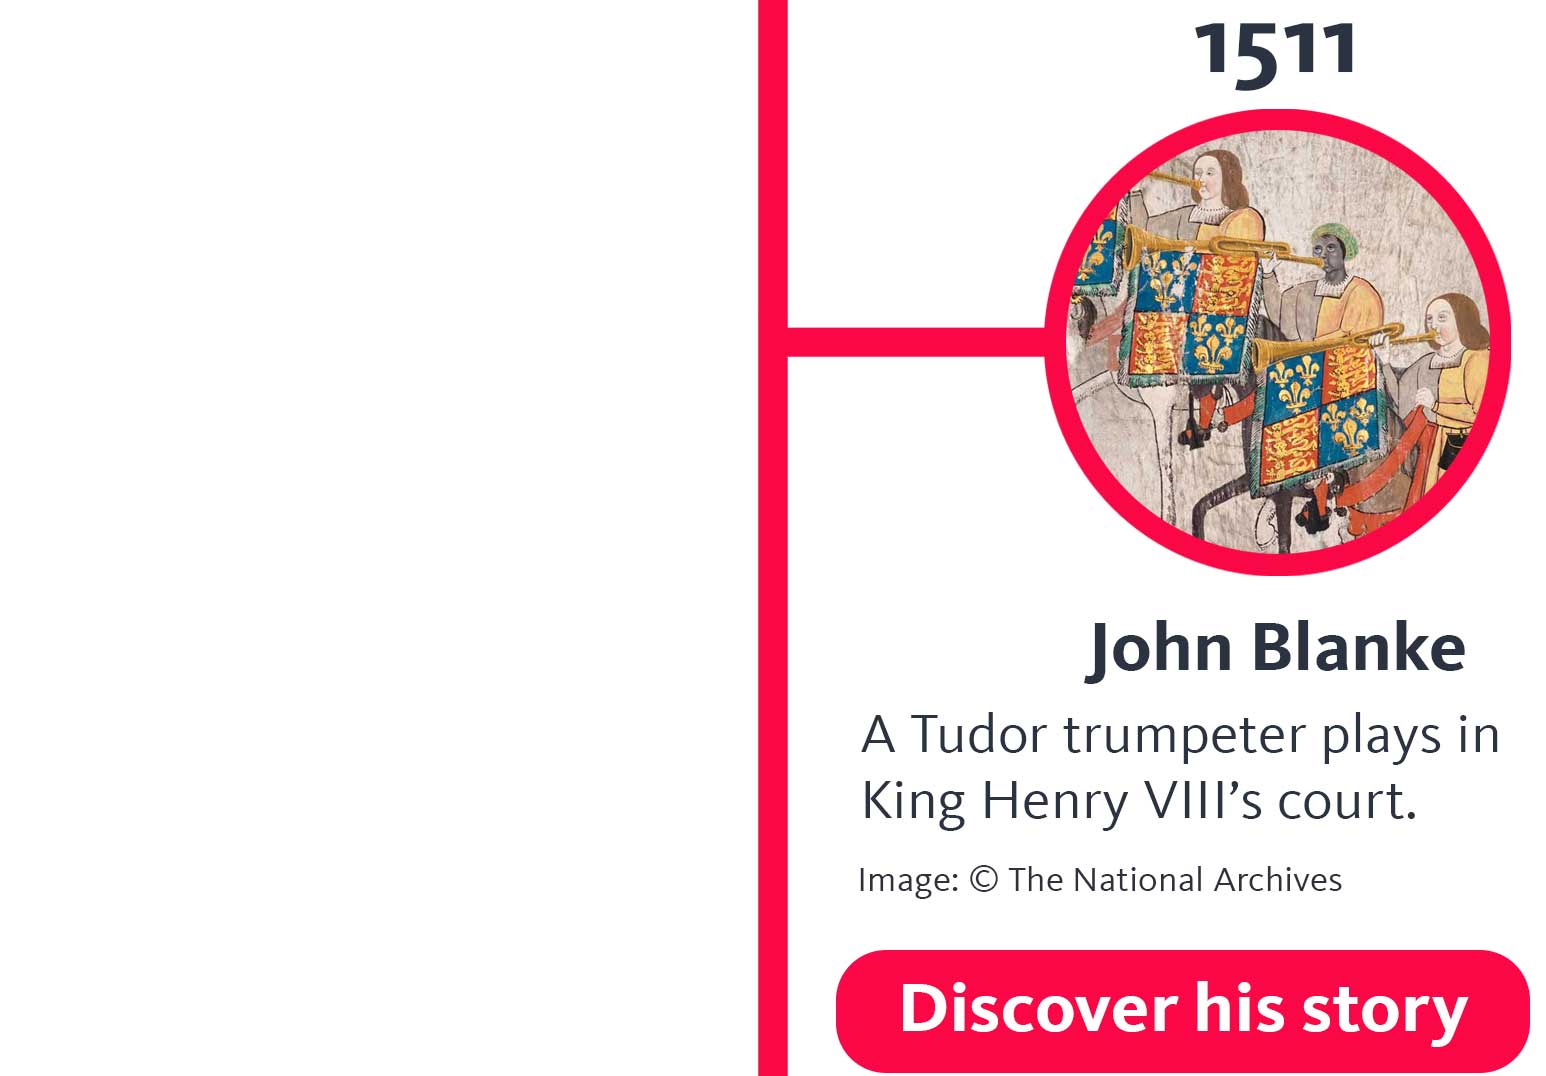 The year '1511' appears above an illustration of several men playing trumpets on horseback. A heading below says 'John Blanke', and text below that says 'A Tudor trumpeter plays in King Henry VIII's court.', and a button says 'Discover his story'.